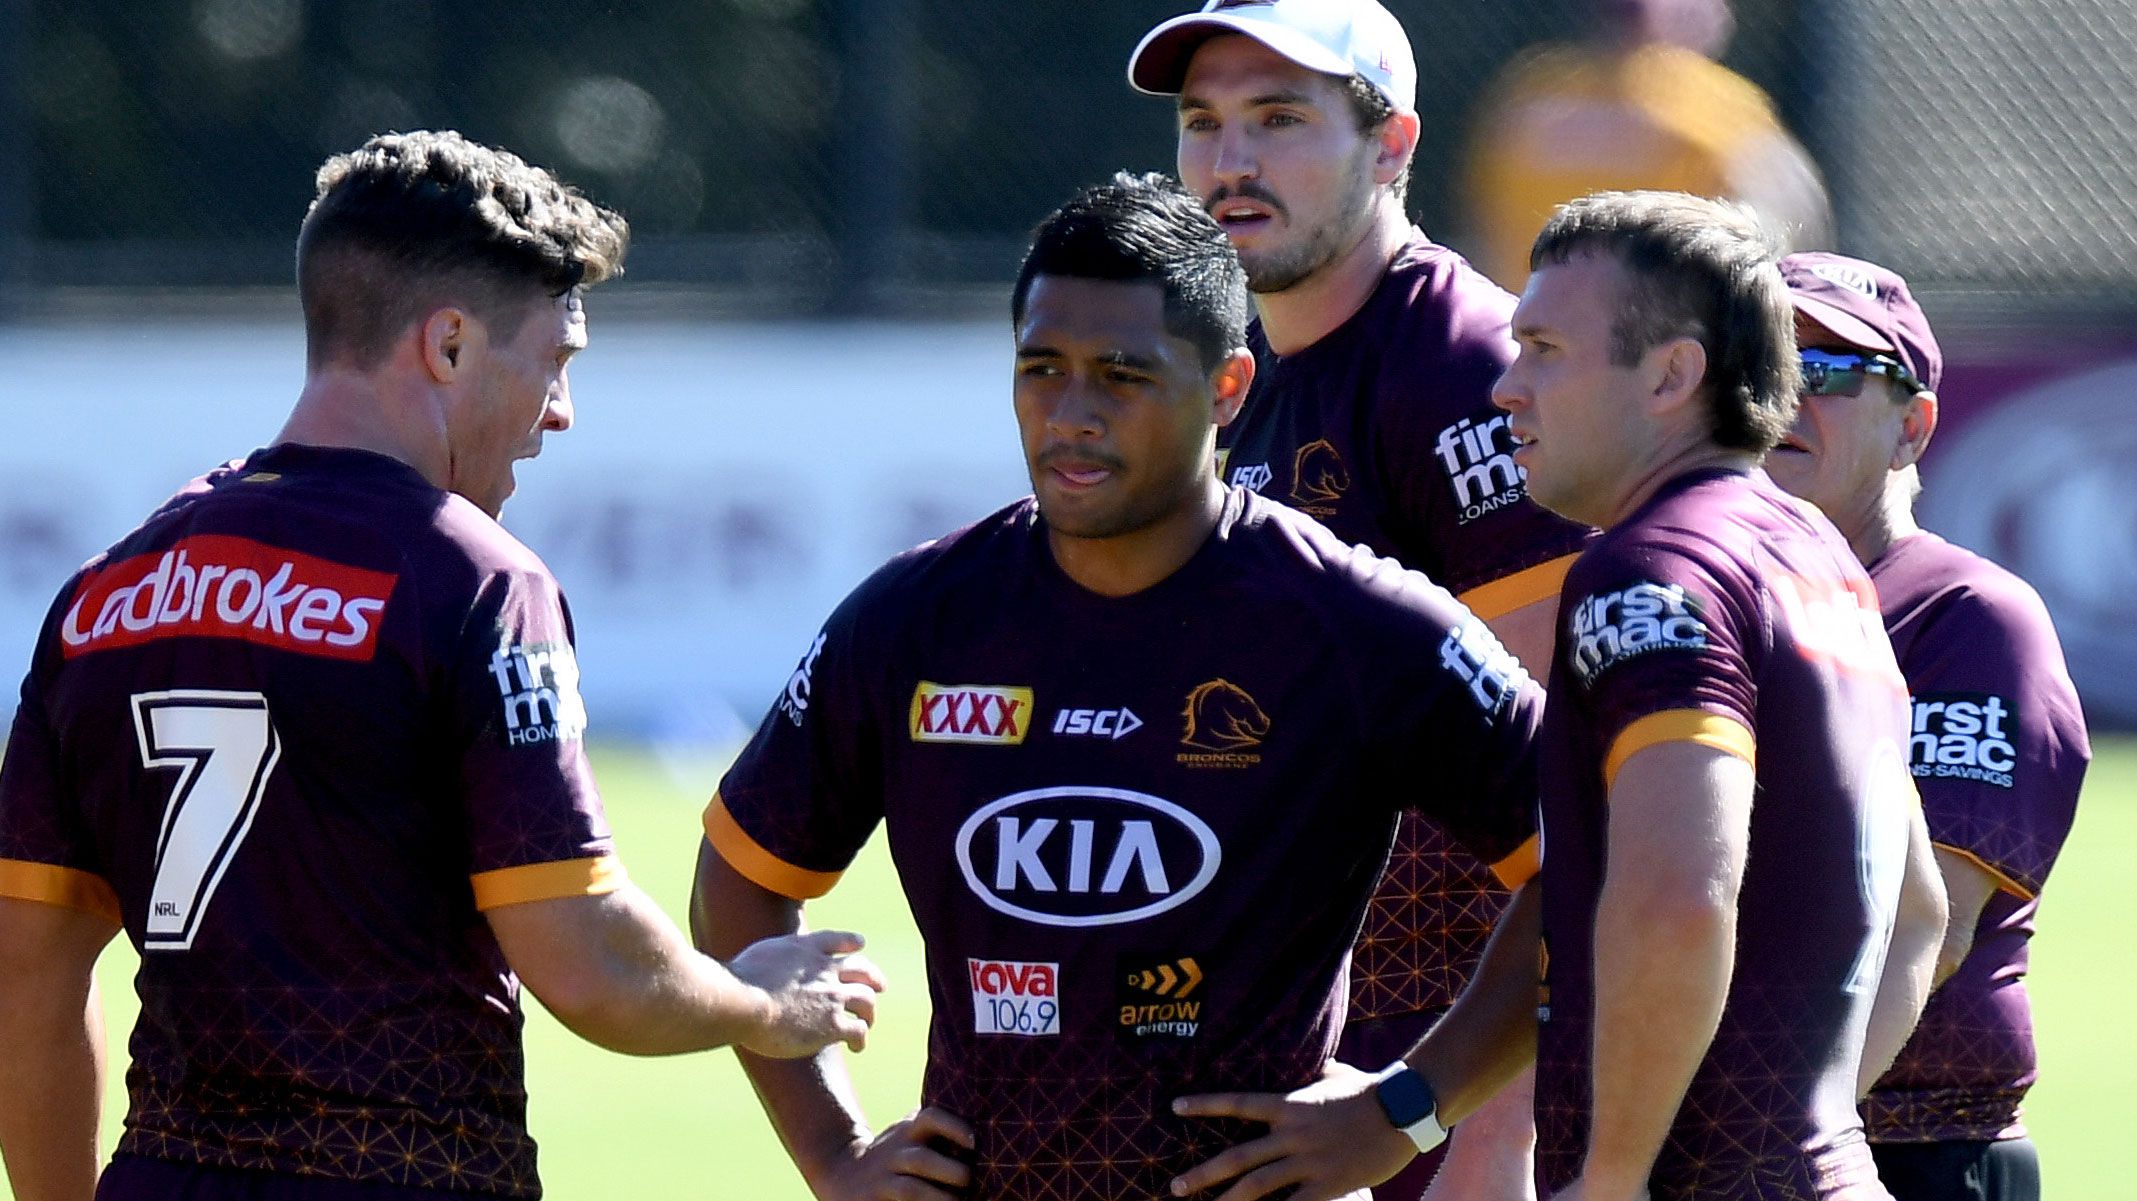 Kevin Walters puts heat on Anthony Milford in contract year for Broncos star